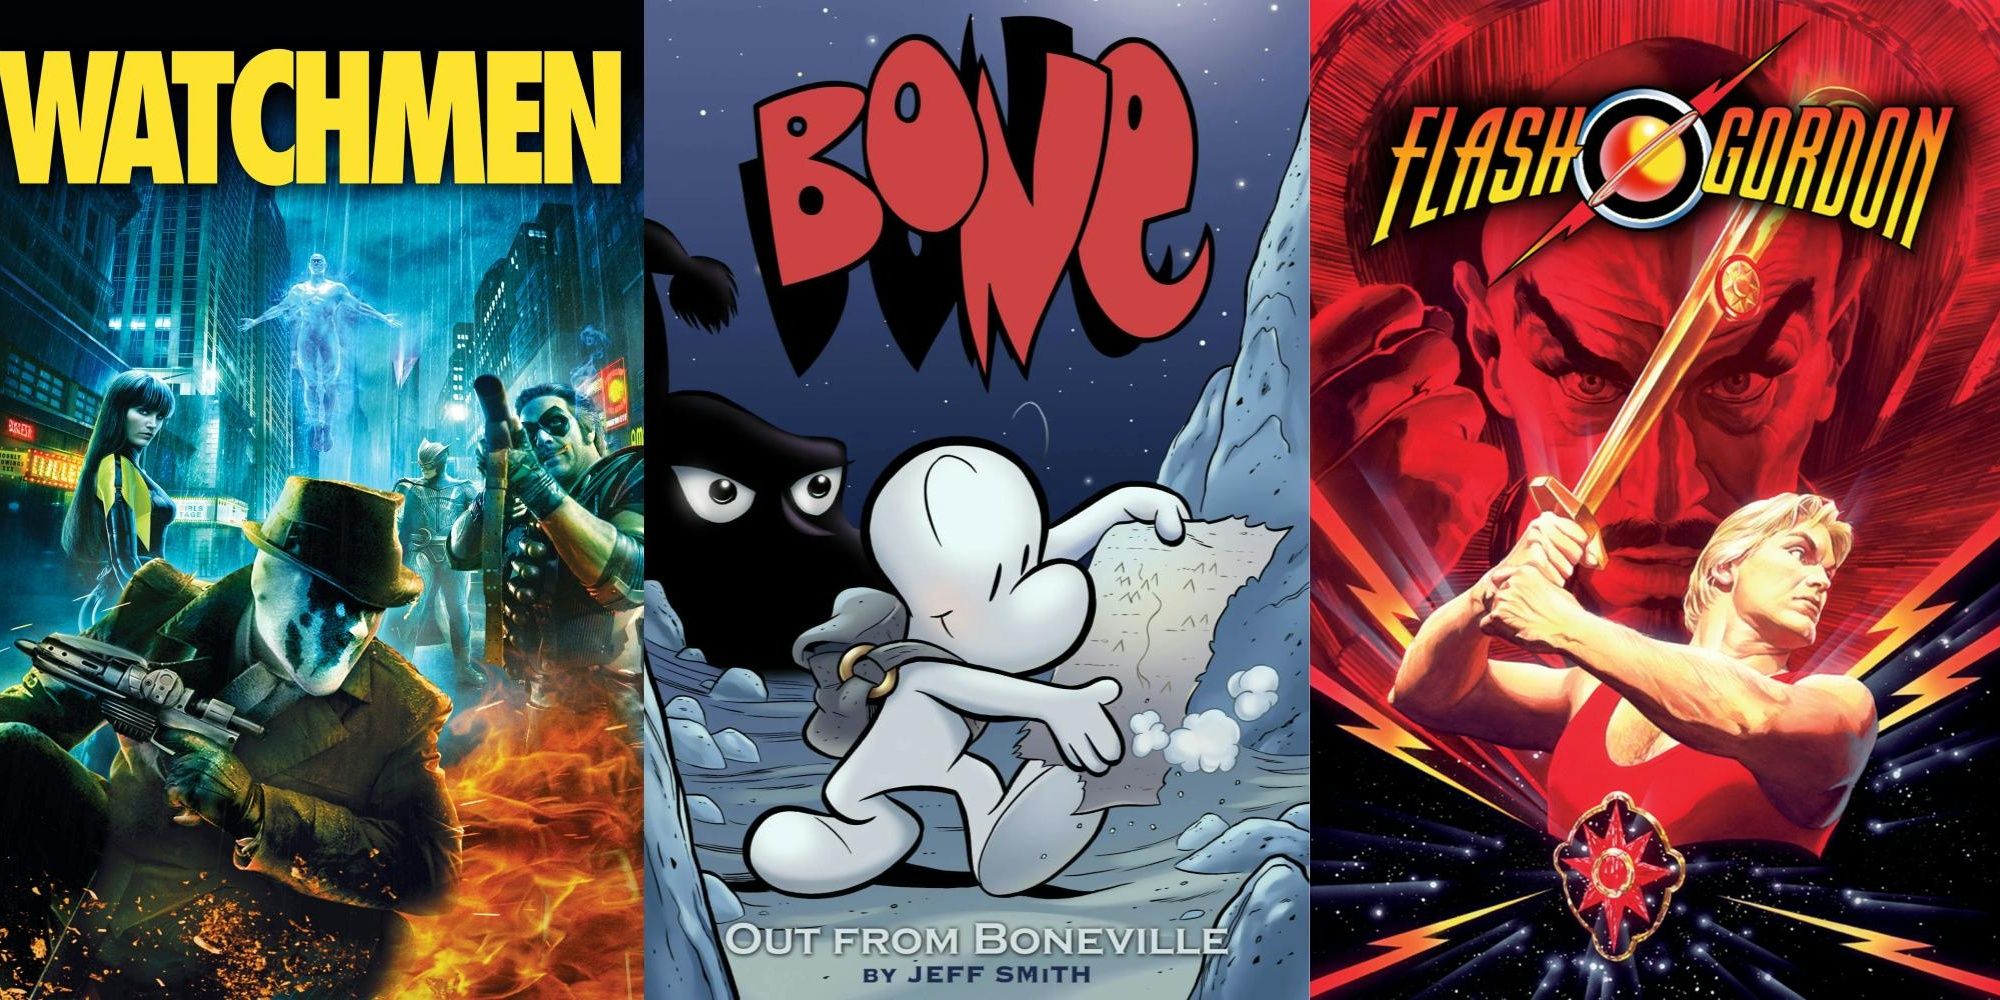 Split Images - Covers and movie posters for Watchmen, Bone & Flash Gordon